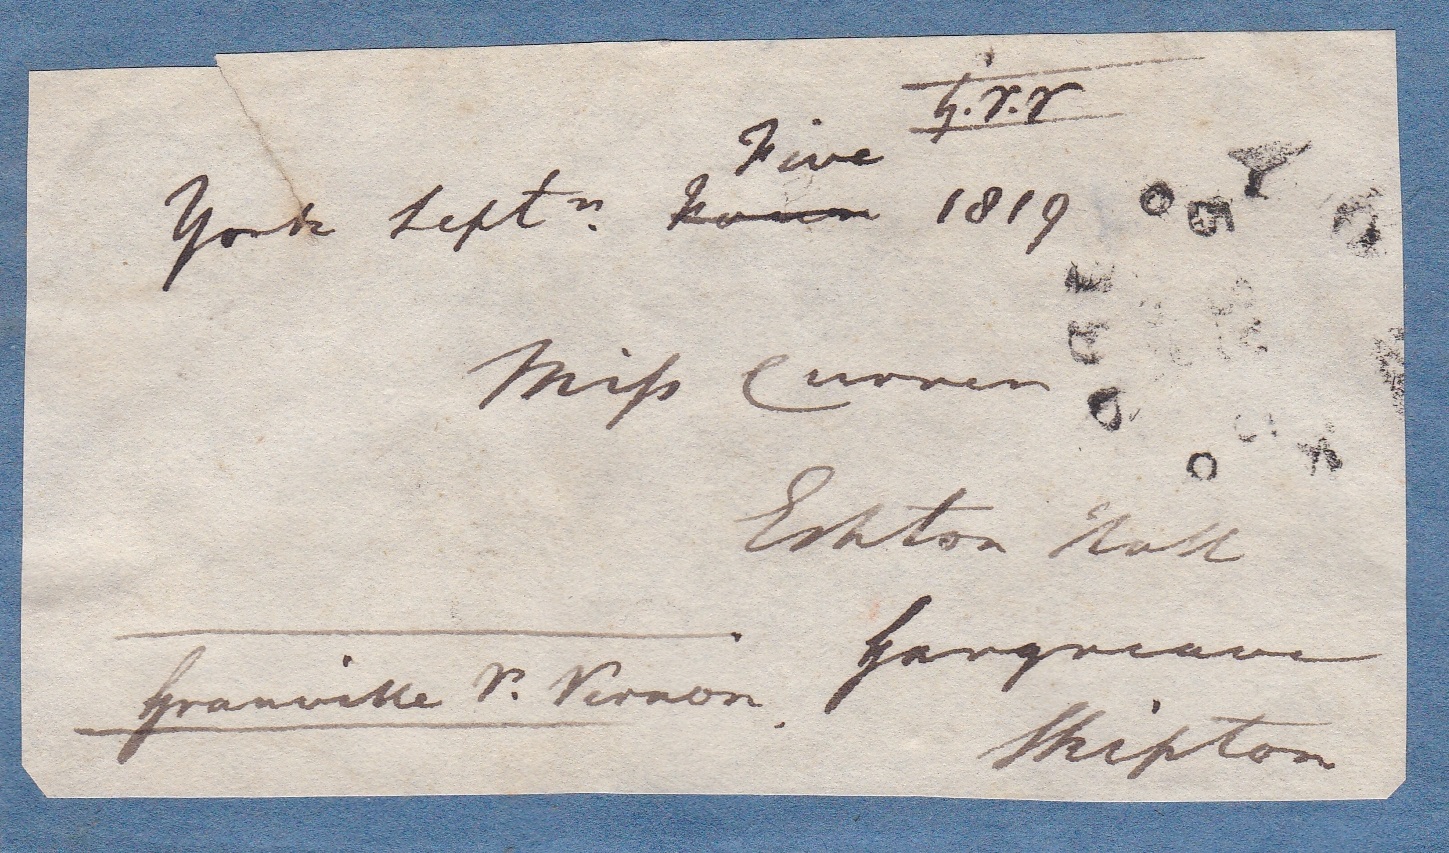 Great Britain 1815-1819-Two pre stamp cover pieces attached to a card (1) dated 5.7.1815 London